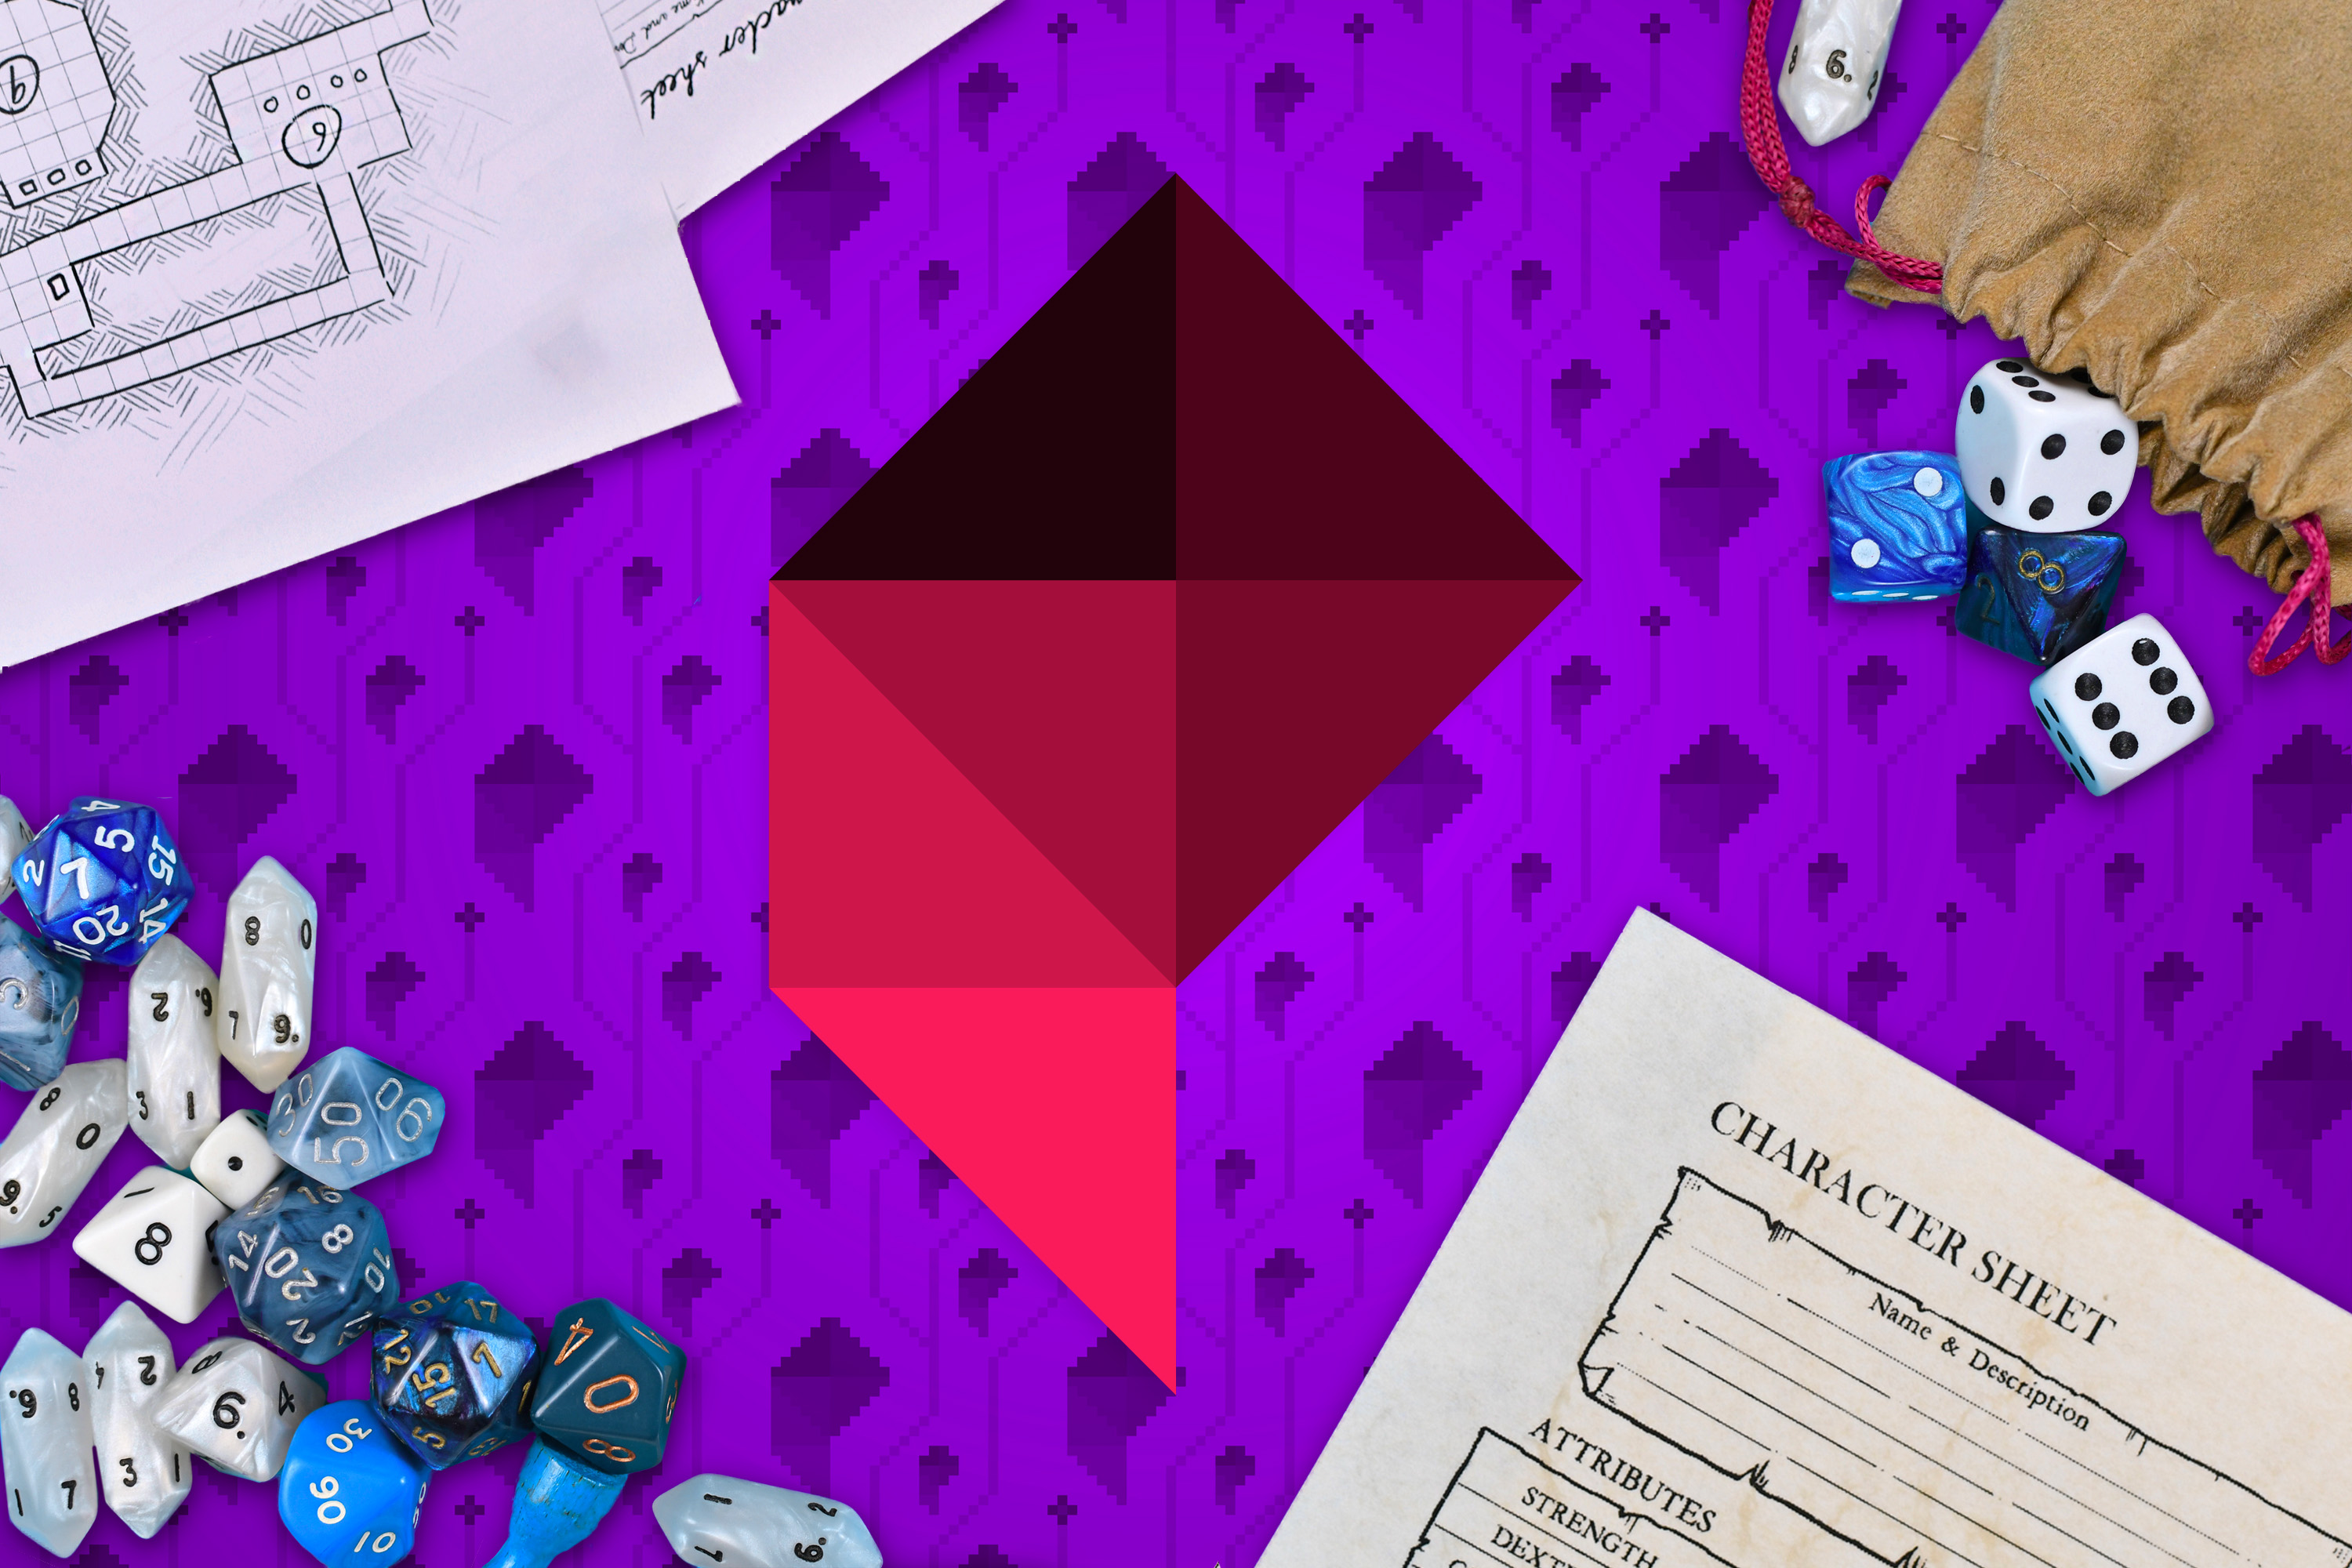 The Polygon logo against a purple background, surrounded by playing dice and character sheets.